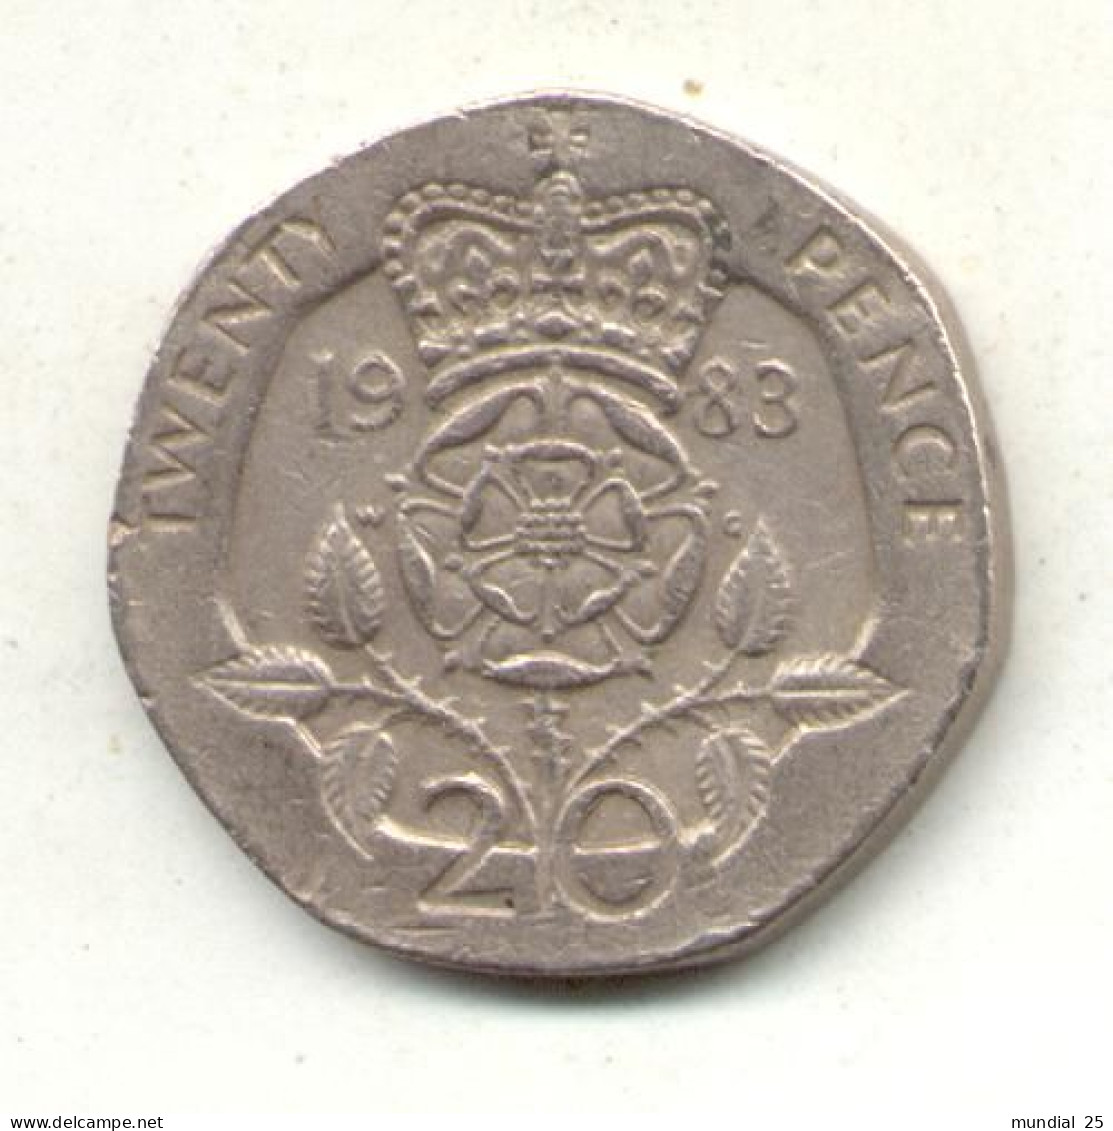 GREAT BRITAIN 20 PENCE 1983 - 20 Pence